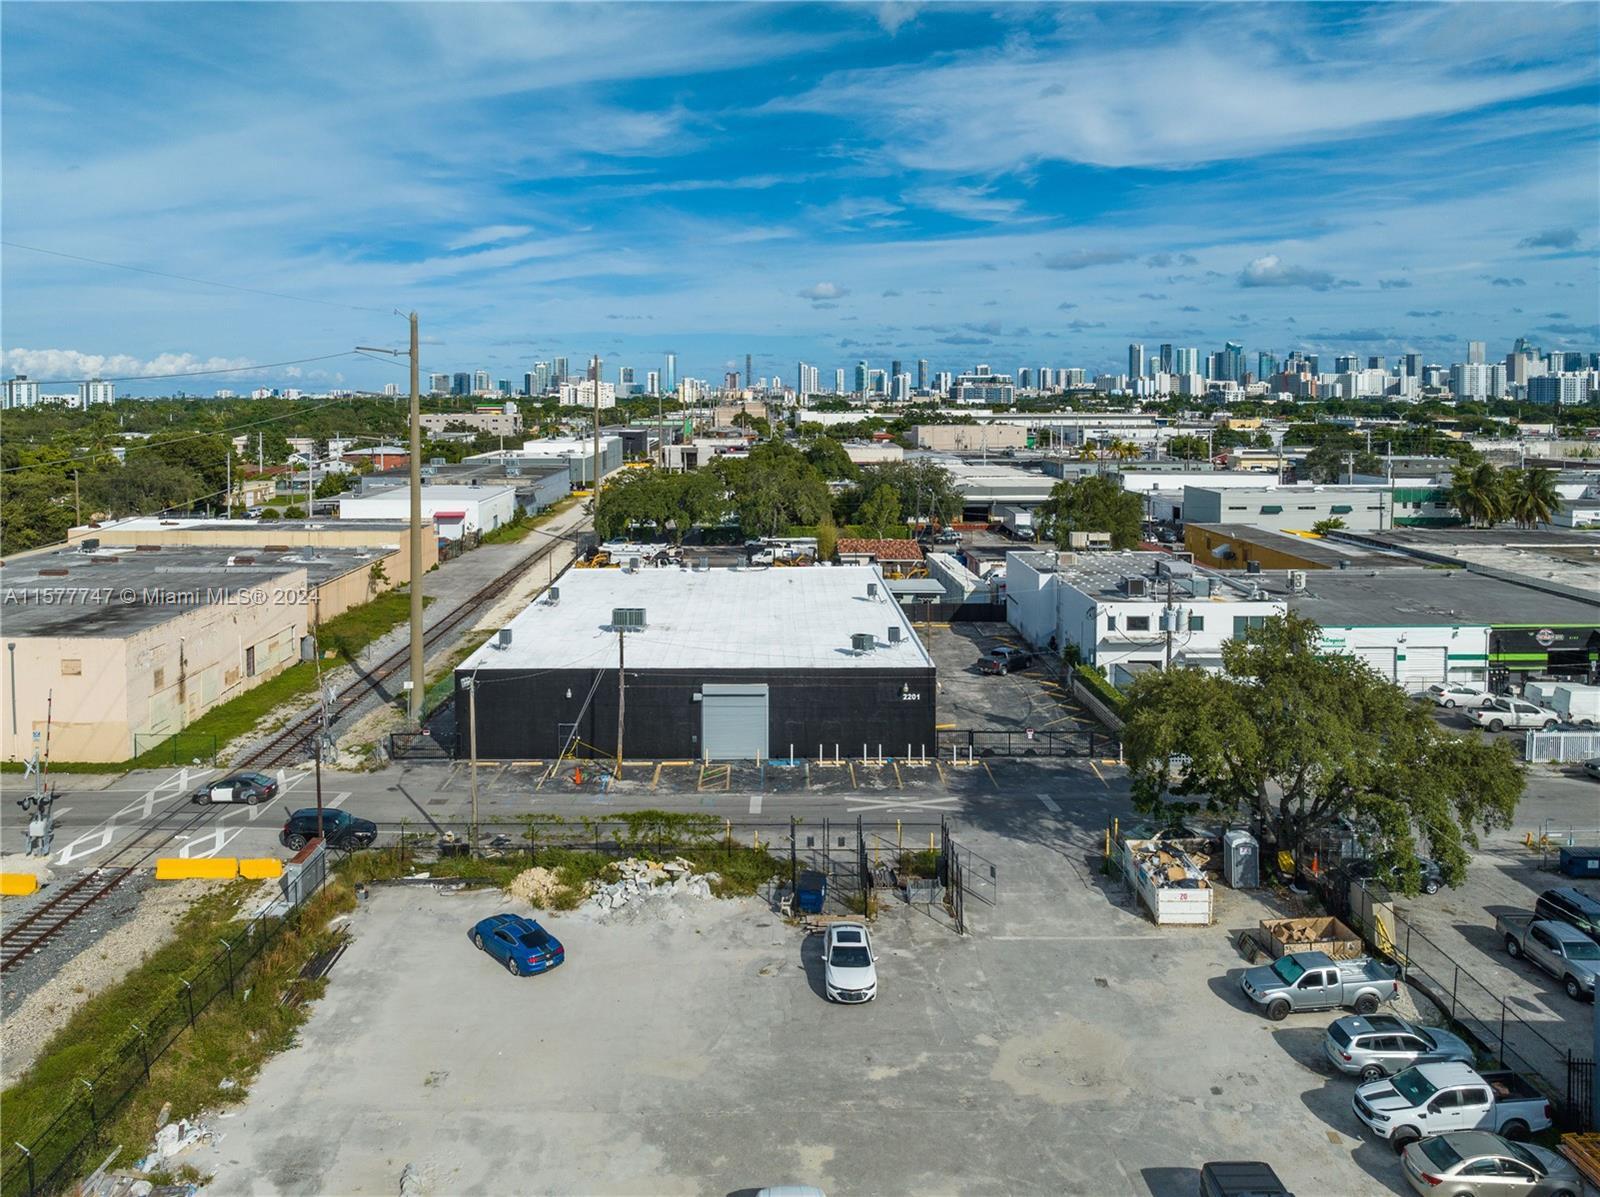 Photo of 2201 NW 24th Ave in Miami, FL